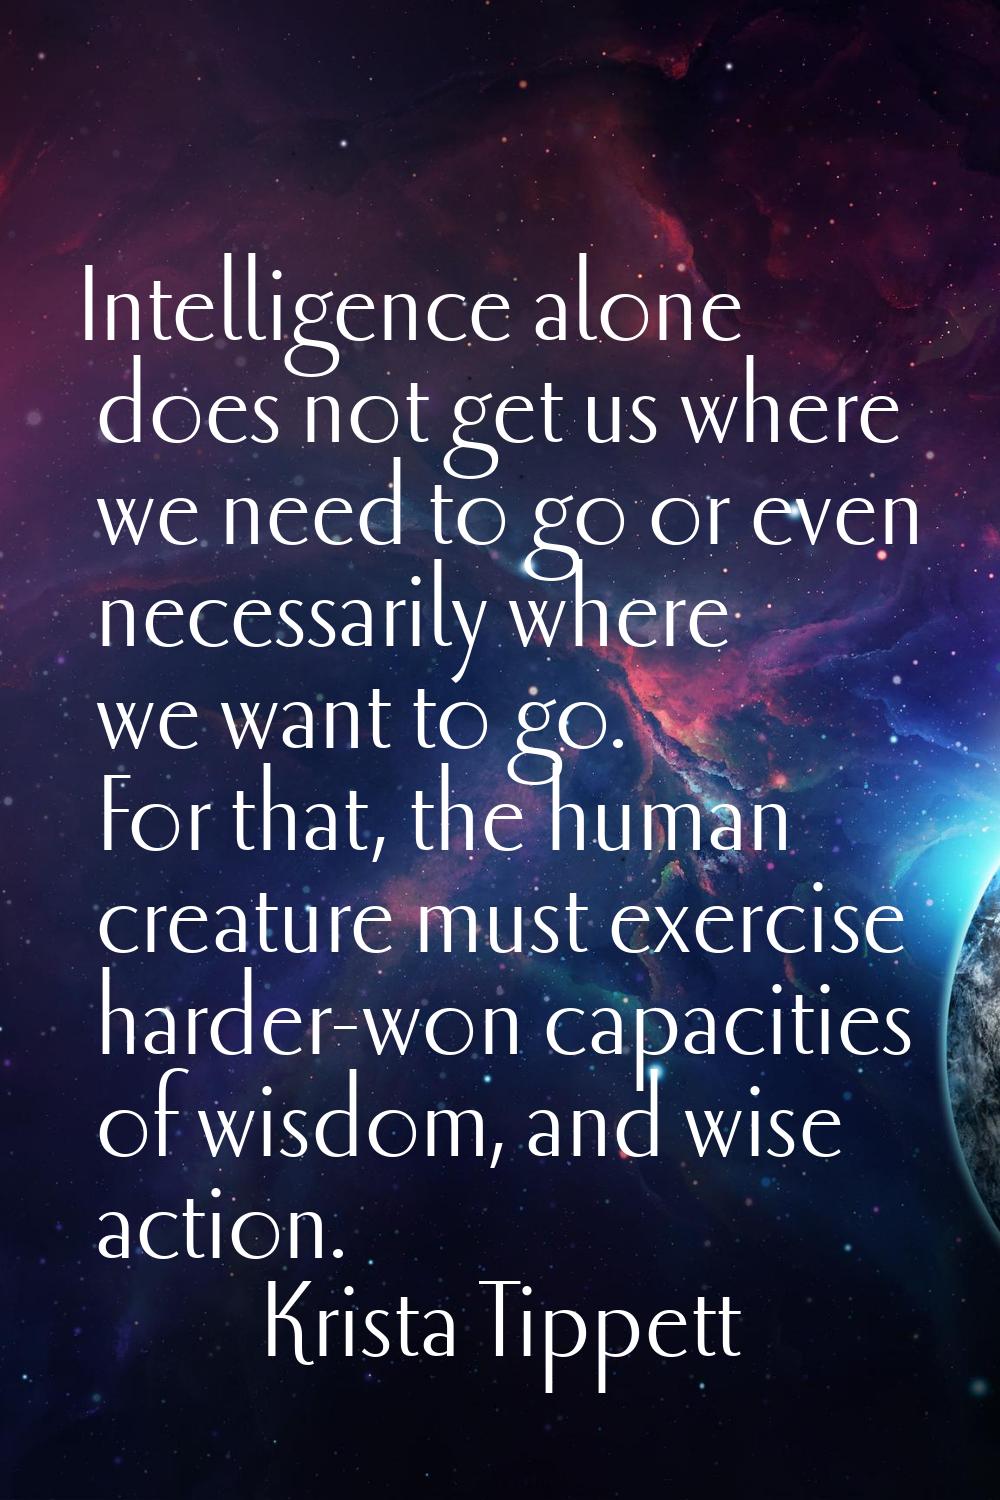 Intelligence alone does not get us where we need to go or even necessarily where we want to go. For